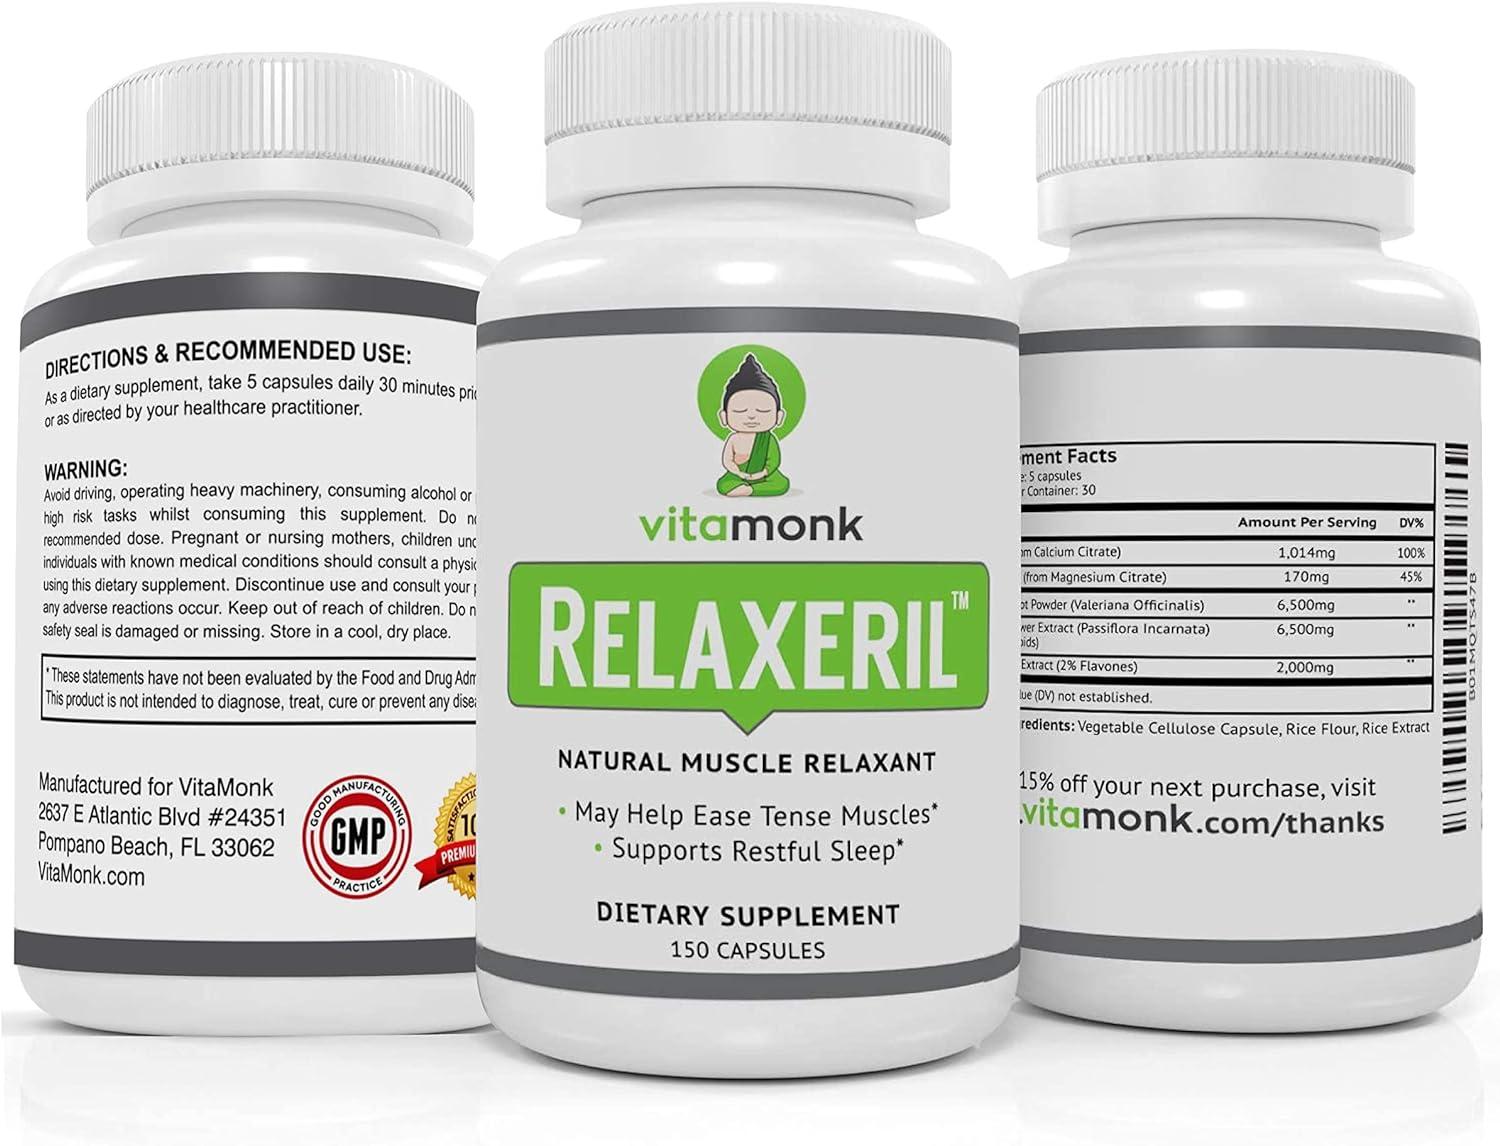 RELAXERIL™ - Powerful Natural Muscle Relaxers By VitaMonk - For Spasms,  Sore Muscles and Tightness With This Natural Muscle Relaxer Supplement -  150 Relaxant Capsules - Relax Tension and Get Relief by